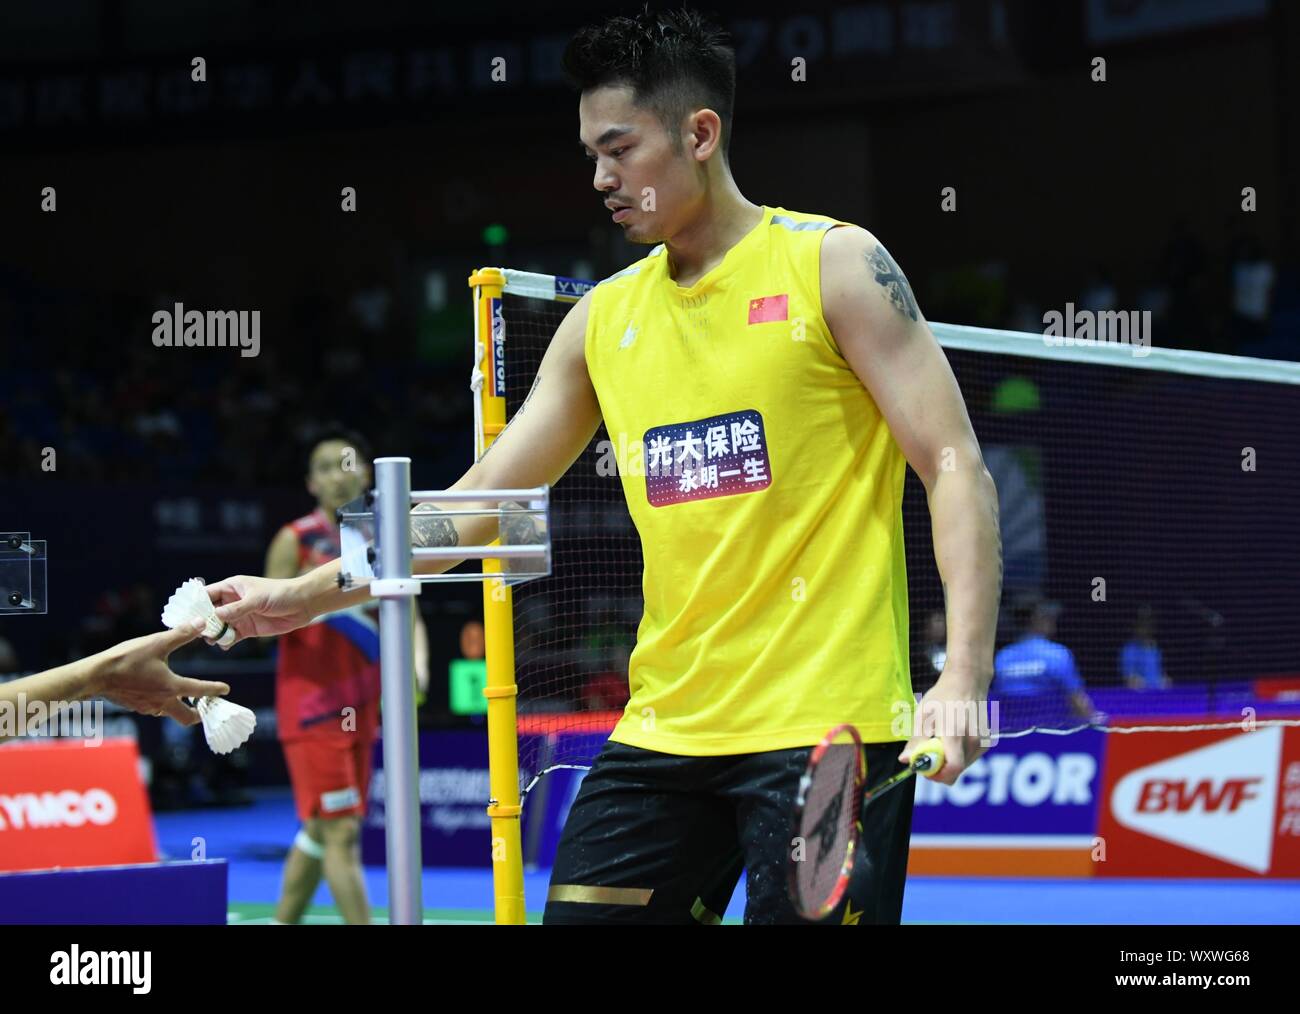 Chinese professional badminton player Lin Dan competes against Japanese professional badminton player Kento Momota at the first round of men's single of VICTOR China Open 2019, in Changzhou city, east China's Jiangsu province, 17 September 2019. Chinese professional badminton player Lin Dan was defeated by Japanese professional badminton player Kento Momota with 0-2 at the first round of men's single of VICTOR China Open 2019, in Changzhou city, east China's Jiangsu province, 17 September 2019. Stock Photo